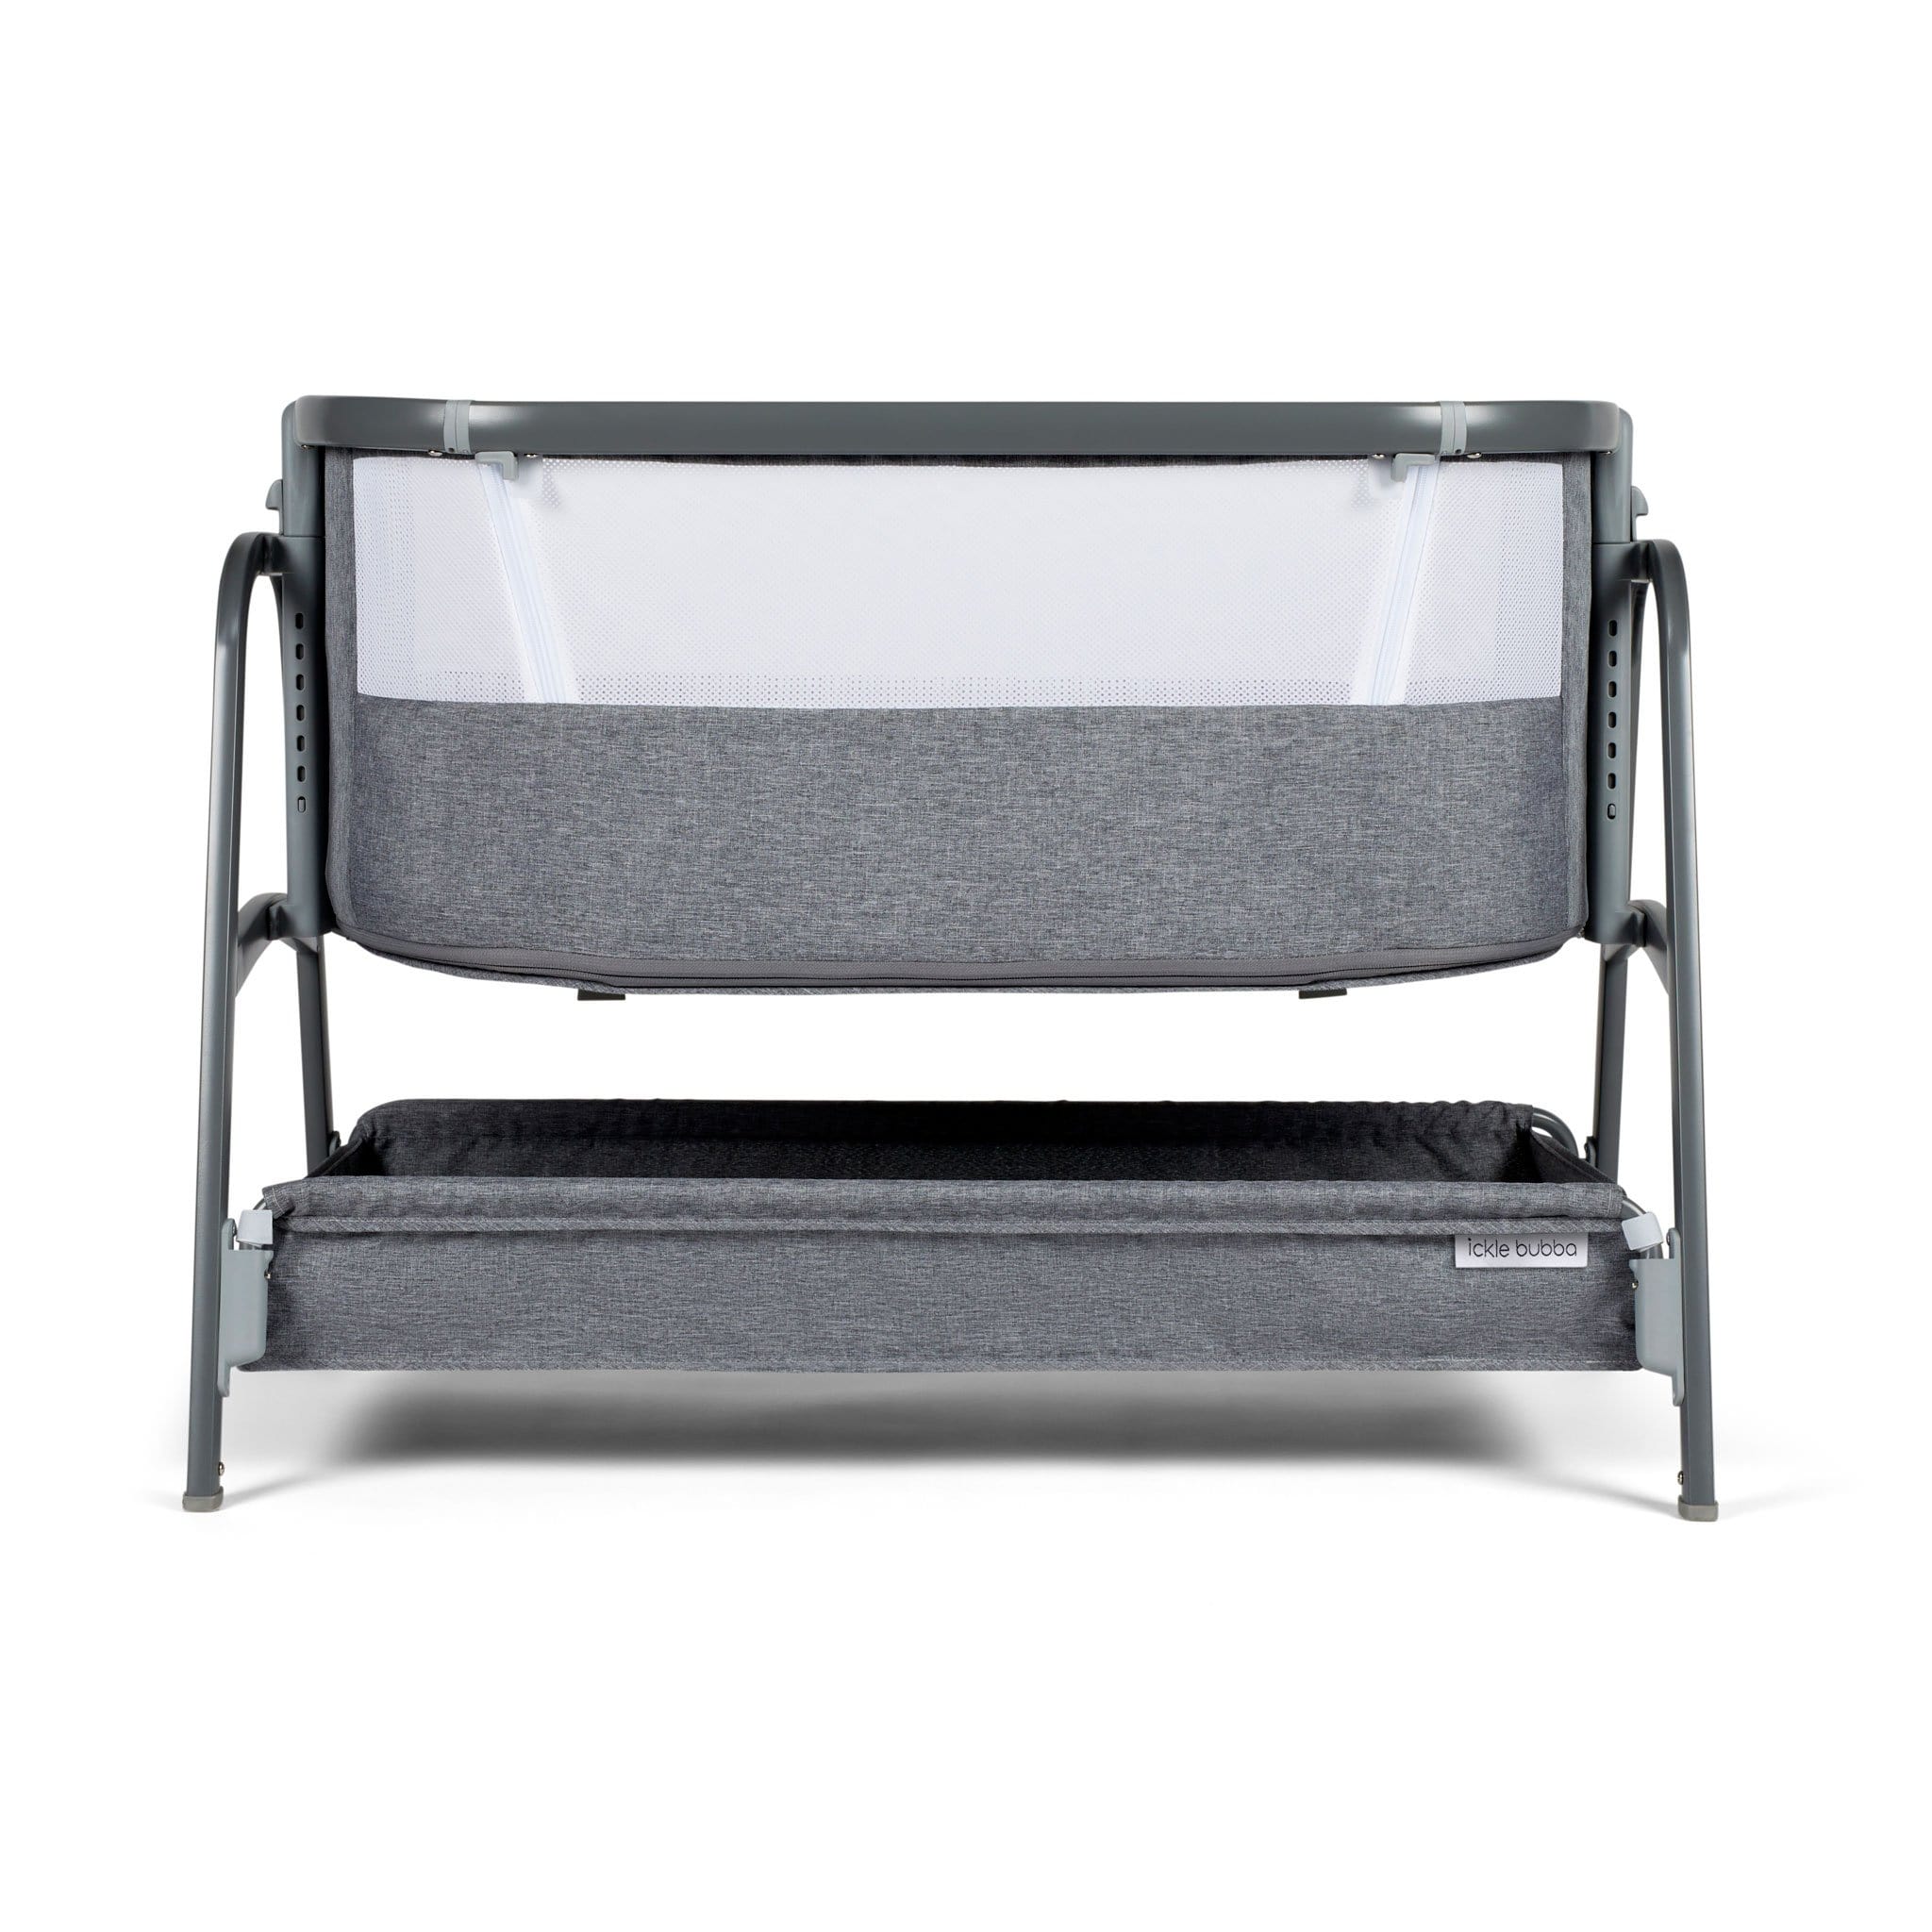 Ickle Bubba moses baskets Ickle Bubba Bubba&Me Bedside Crib Space Grey 40-001-000-860